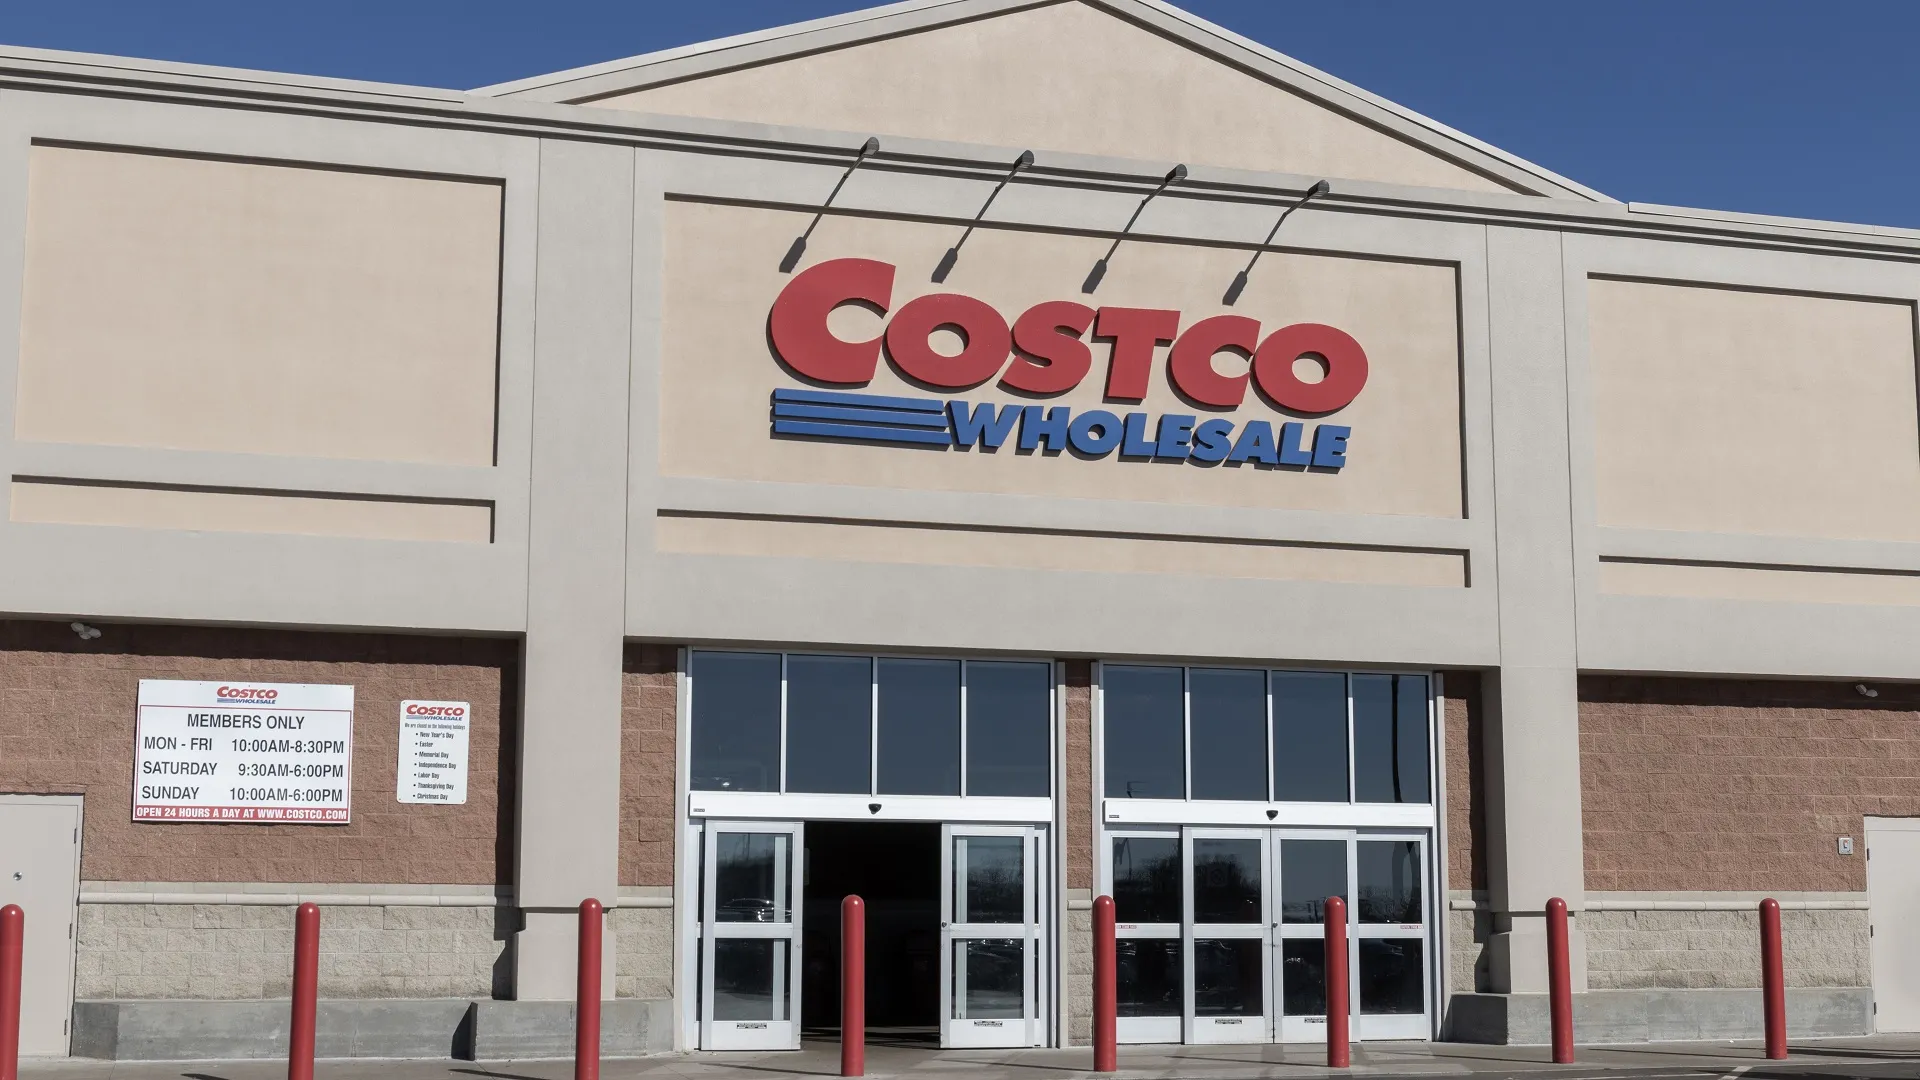 Our Place Always Pan affordable alternative at Costco! @Costco Wholesa